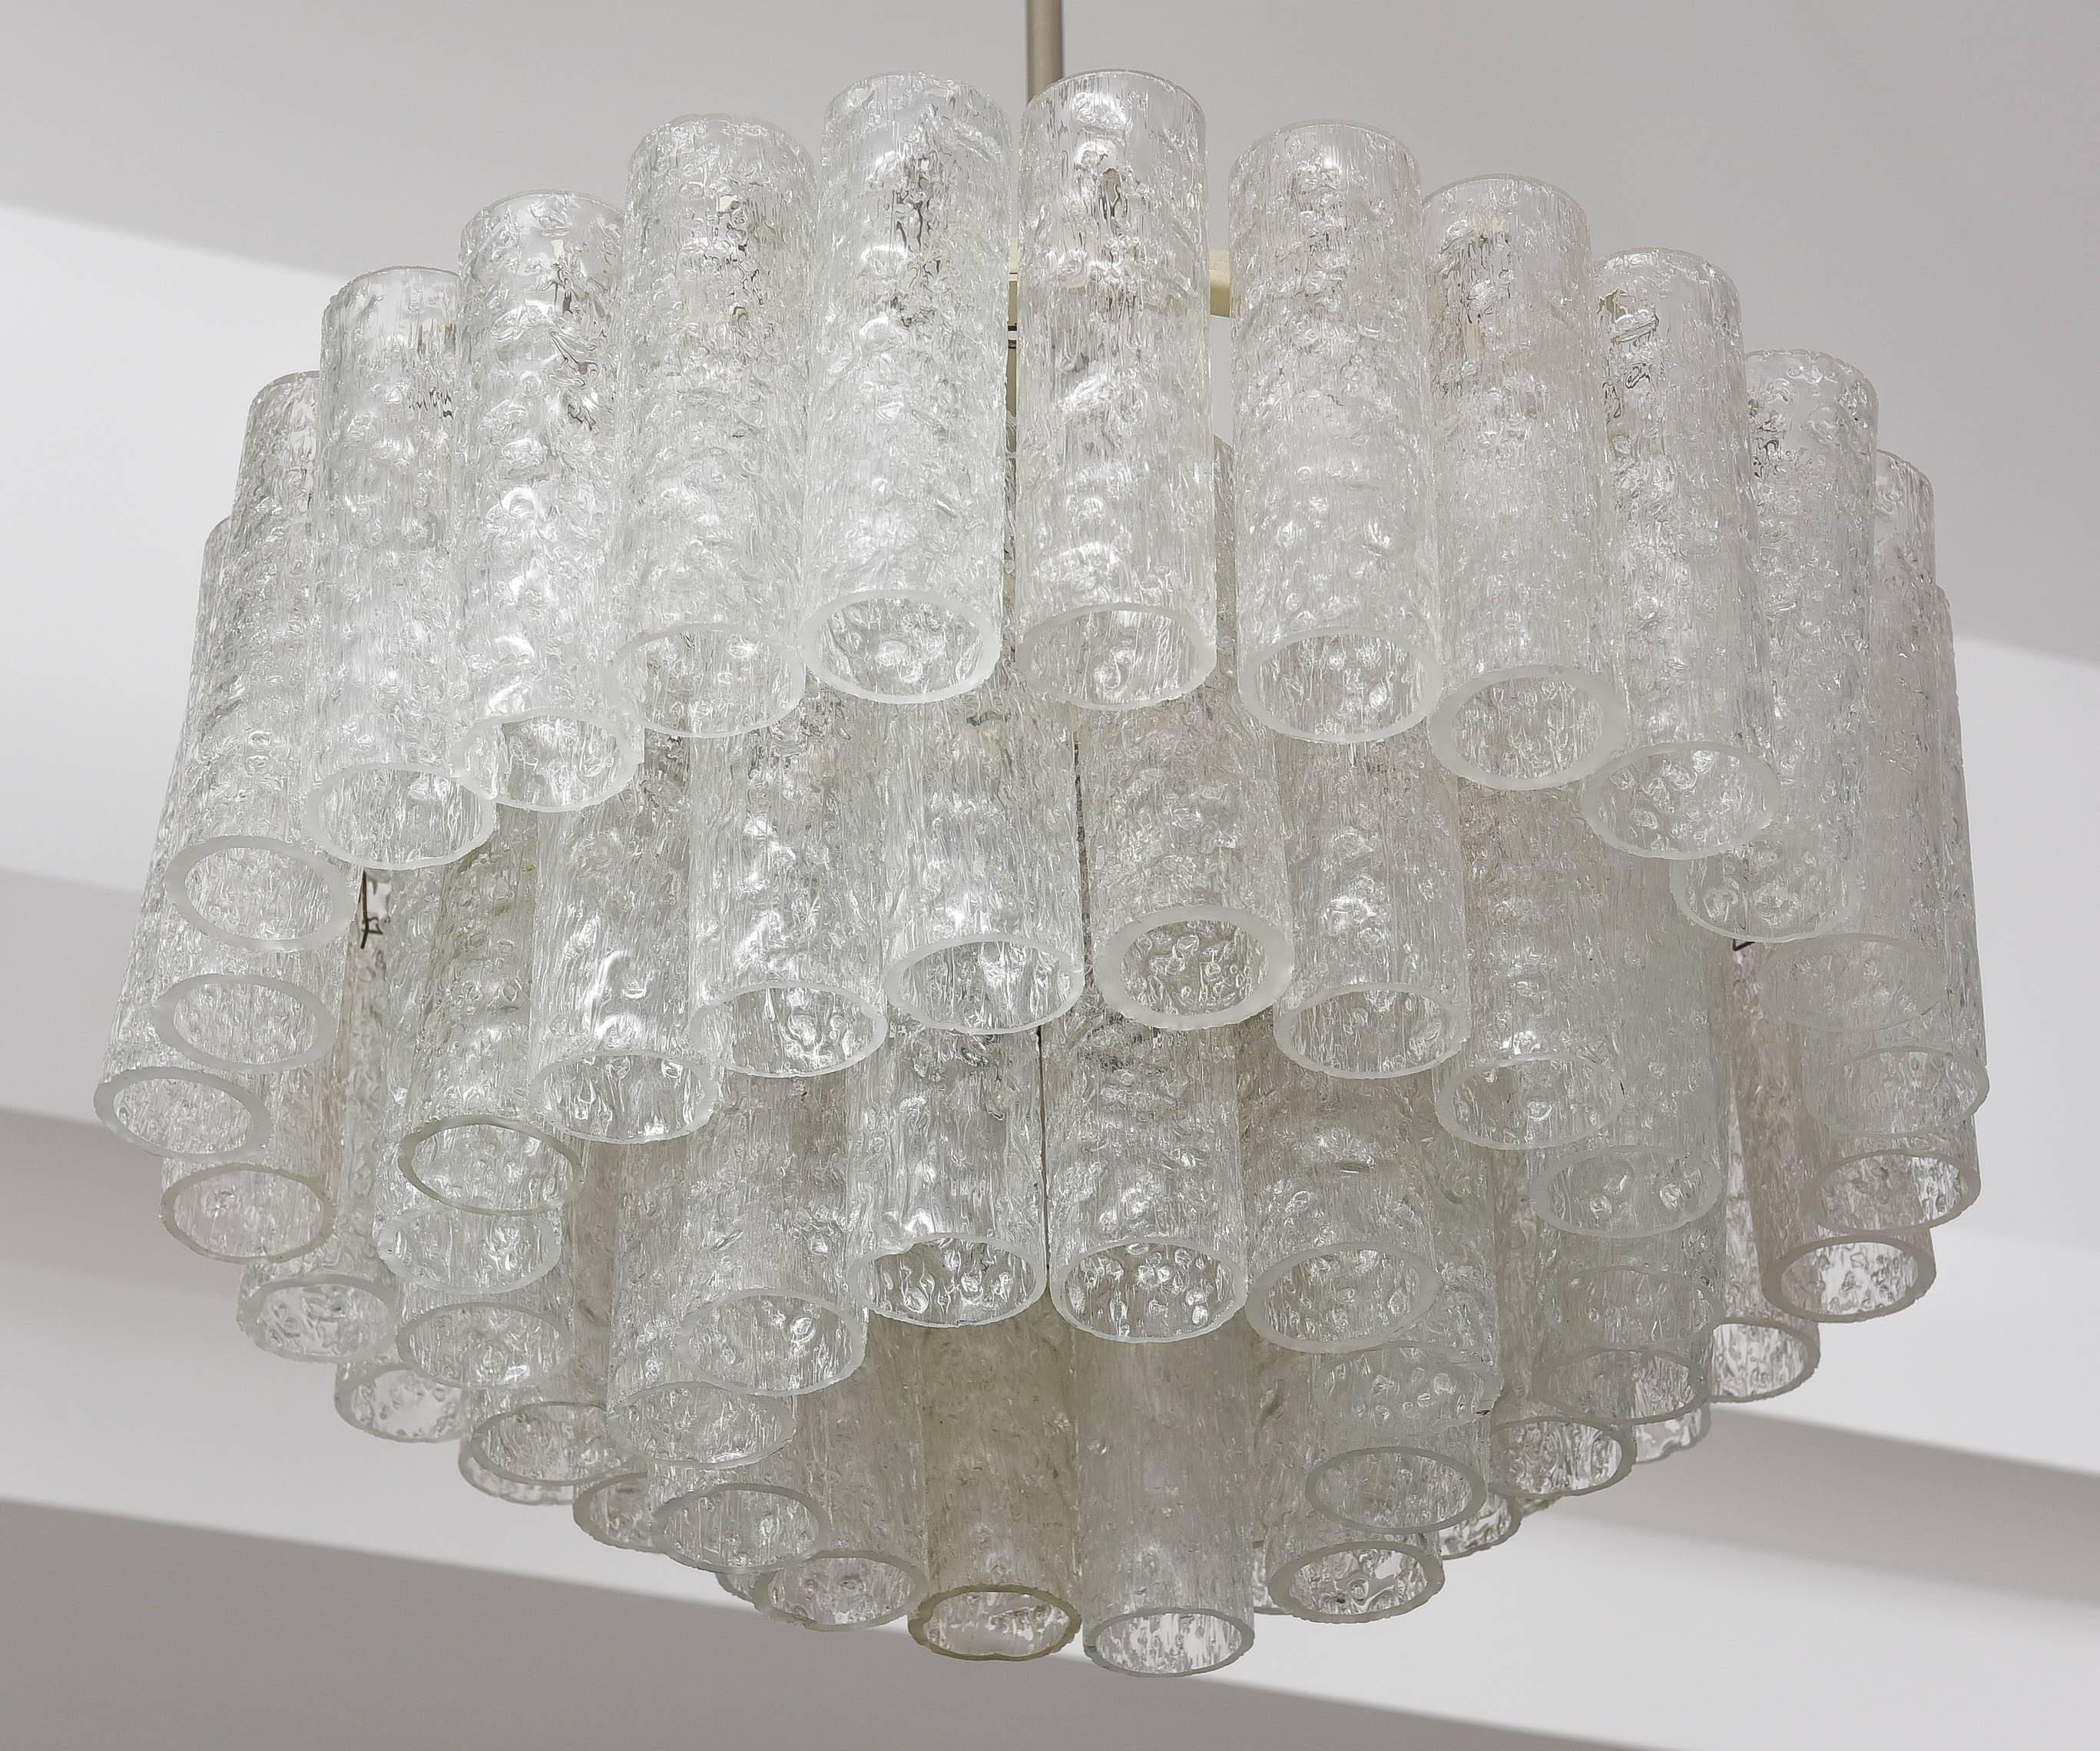 This amazing Mid-Century modern chandelier was produced by the iconic firm of Doria Leuchten of Germany in the 1960s.  The three-tiers of 60 tubular prisms are in what is called the "Eisglas" technique.

Note:  The main body of the